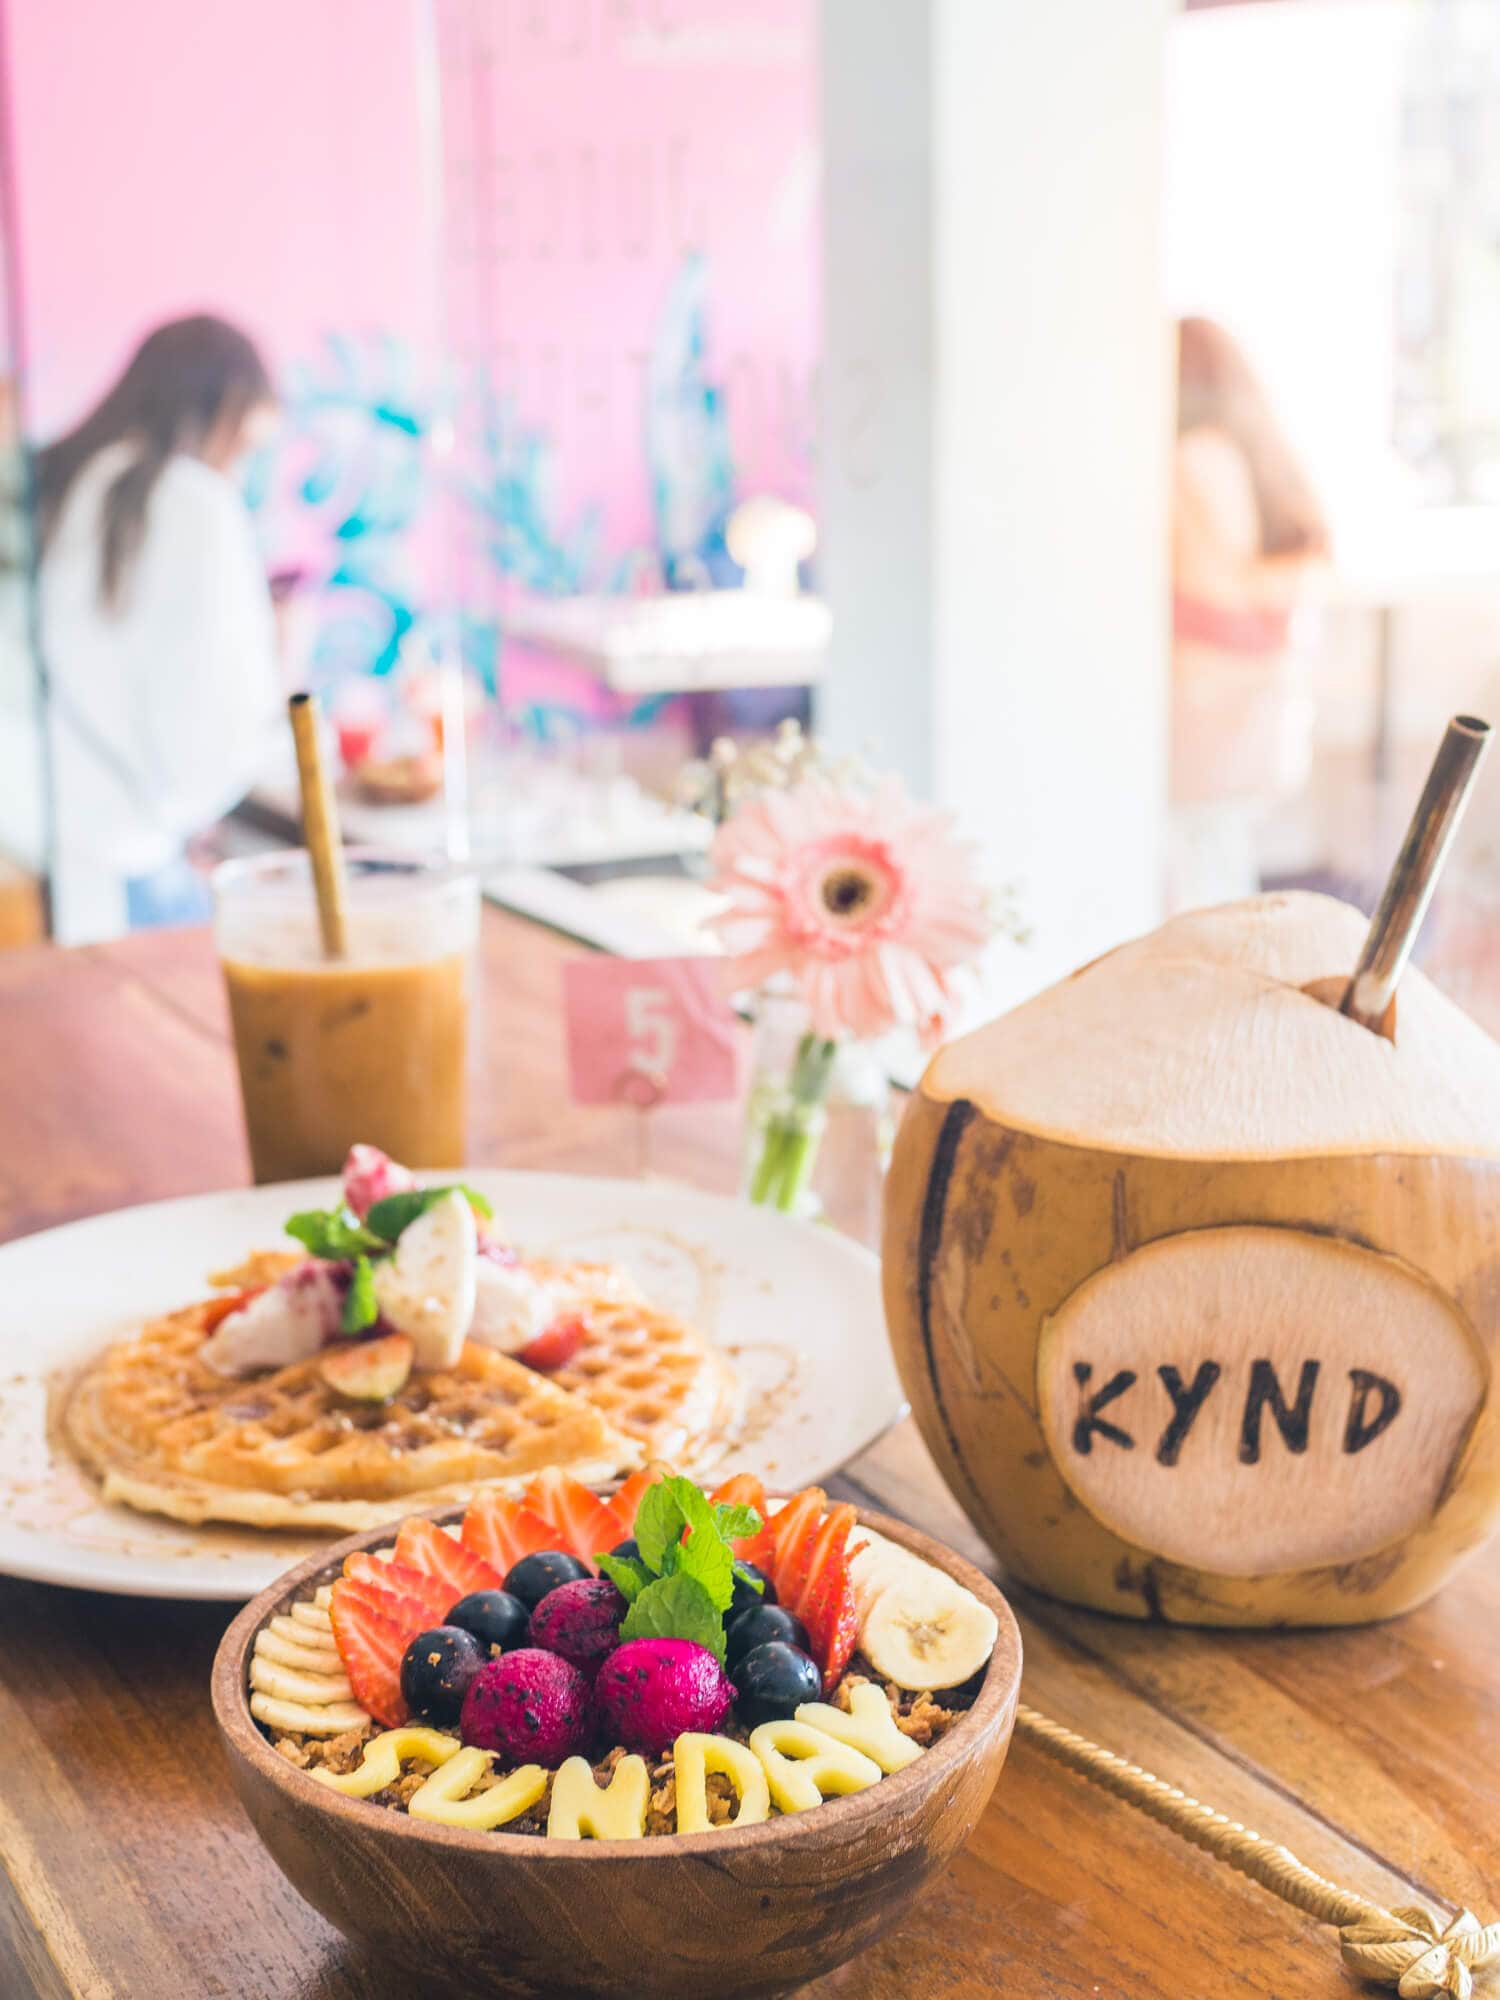 Kynd Community - One of the most Instagrammable cafés in Seminyak, a must during your two week Bali itinerary